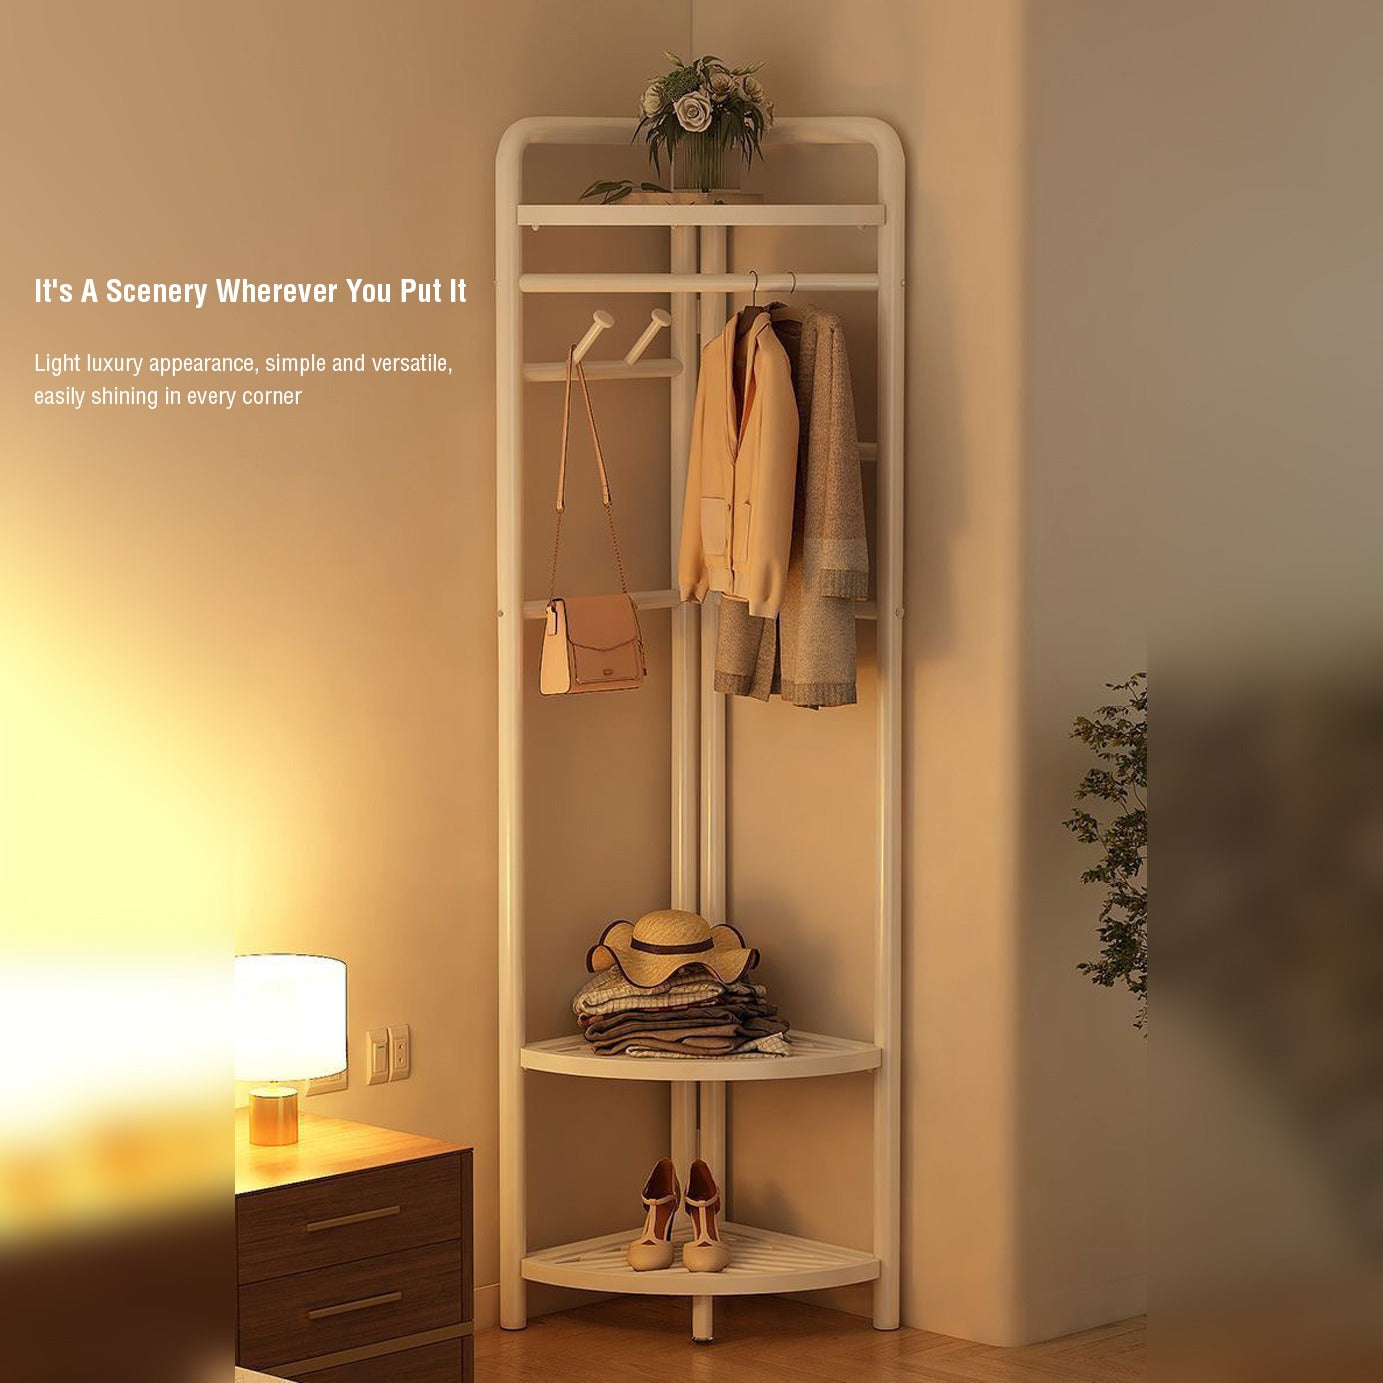 White garment rack kept in a corner of bedroom with a plant above, over below comes hanging area where 2 sweaters and a bag is hanged.